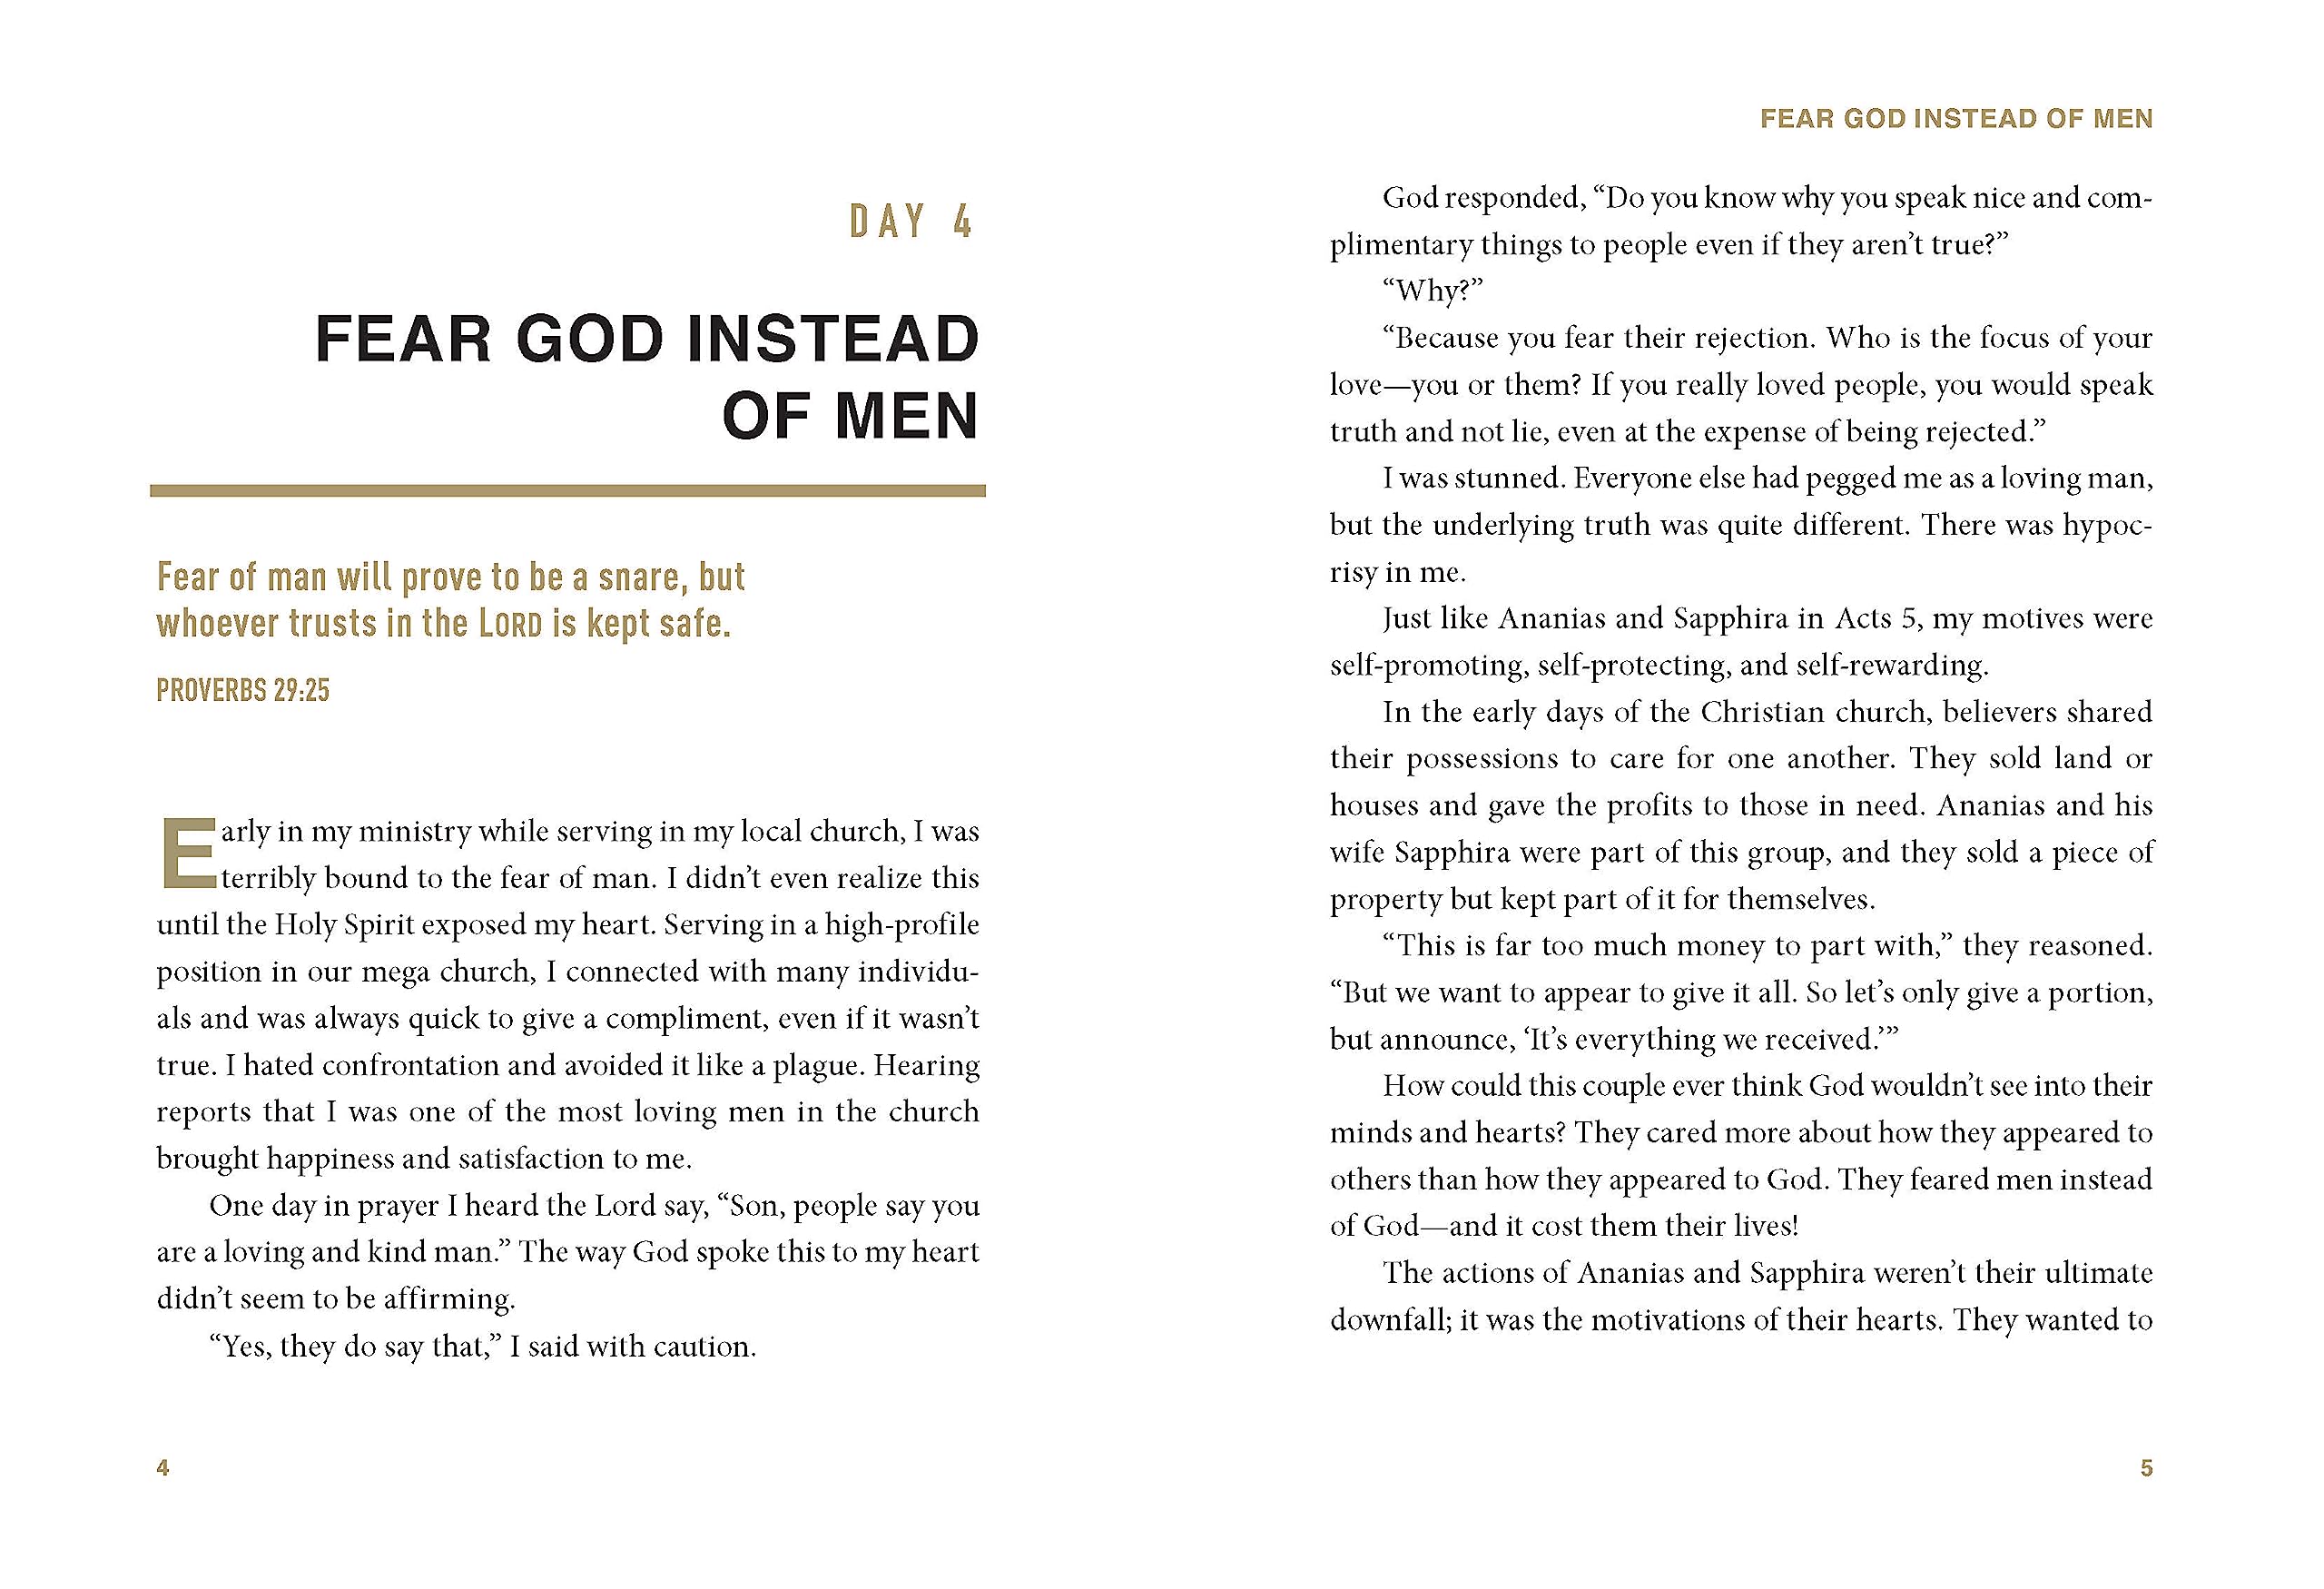 Everyday Courage: 50 Devotions to Build a Bold Faith